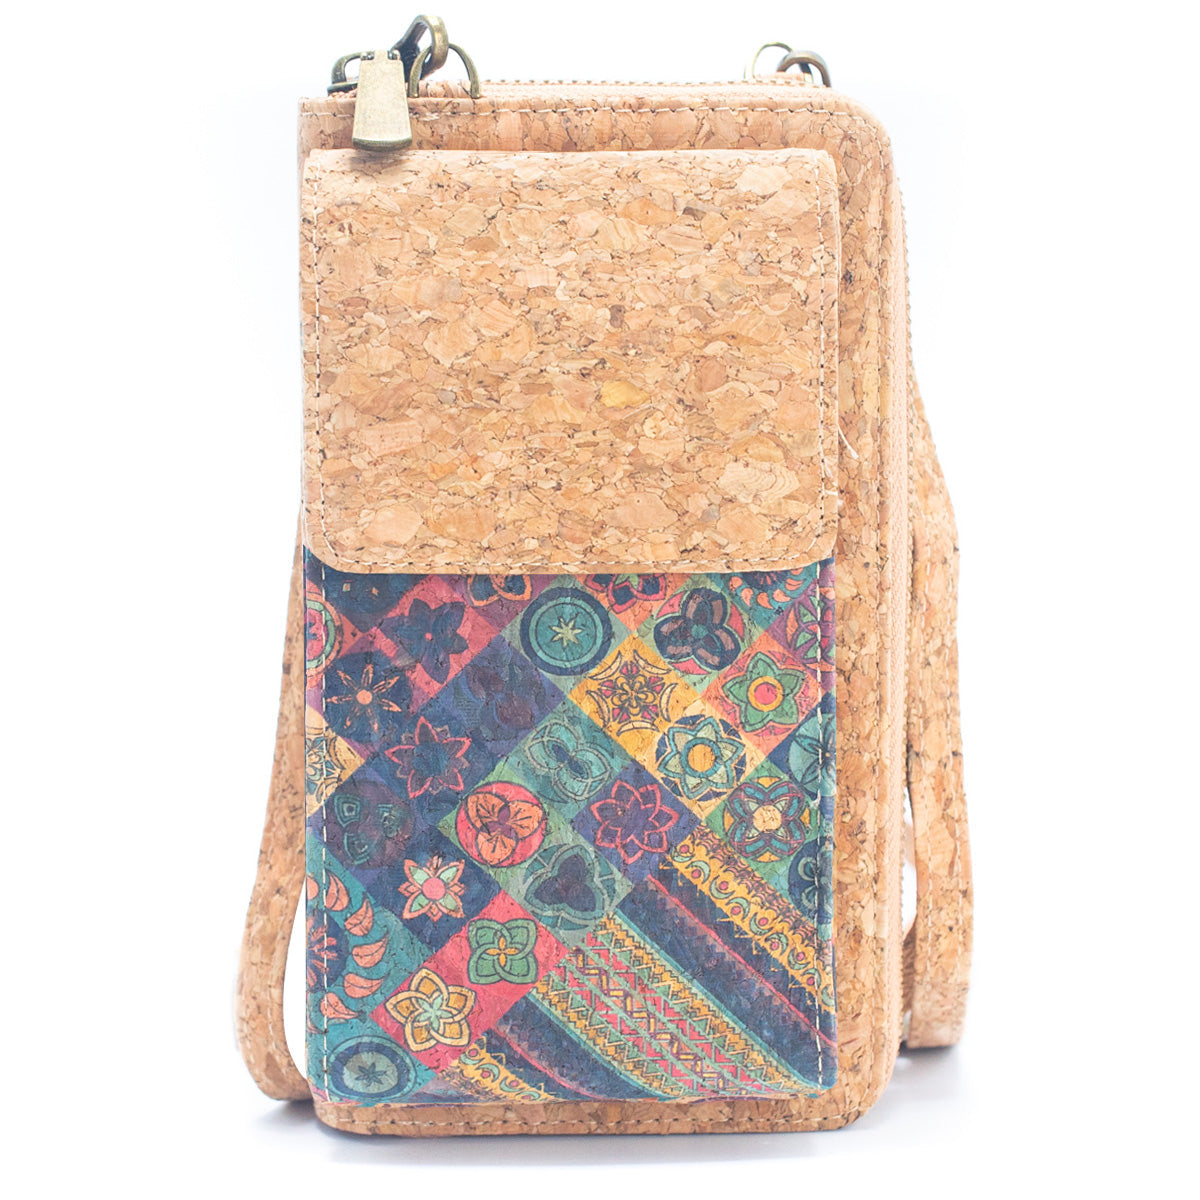 Natural Cork Crossbody Zipper Wallet w/ Phone Compartiment | THE CORK COLLECTION